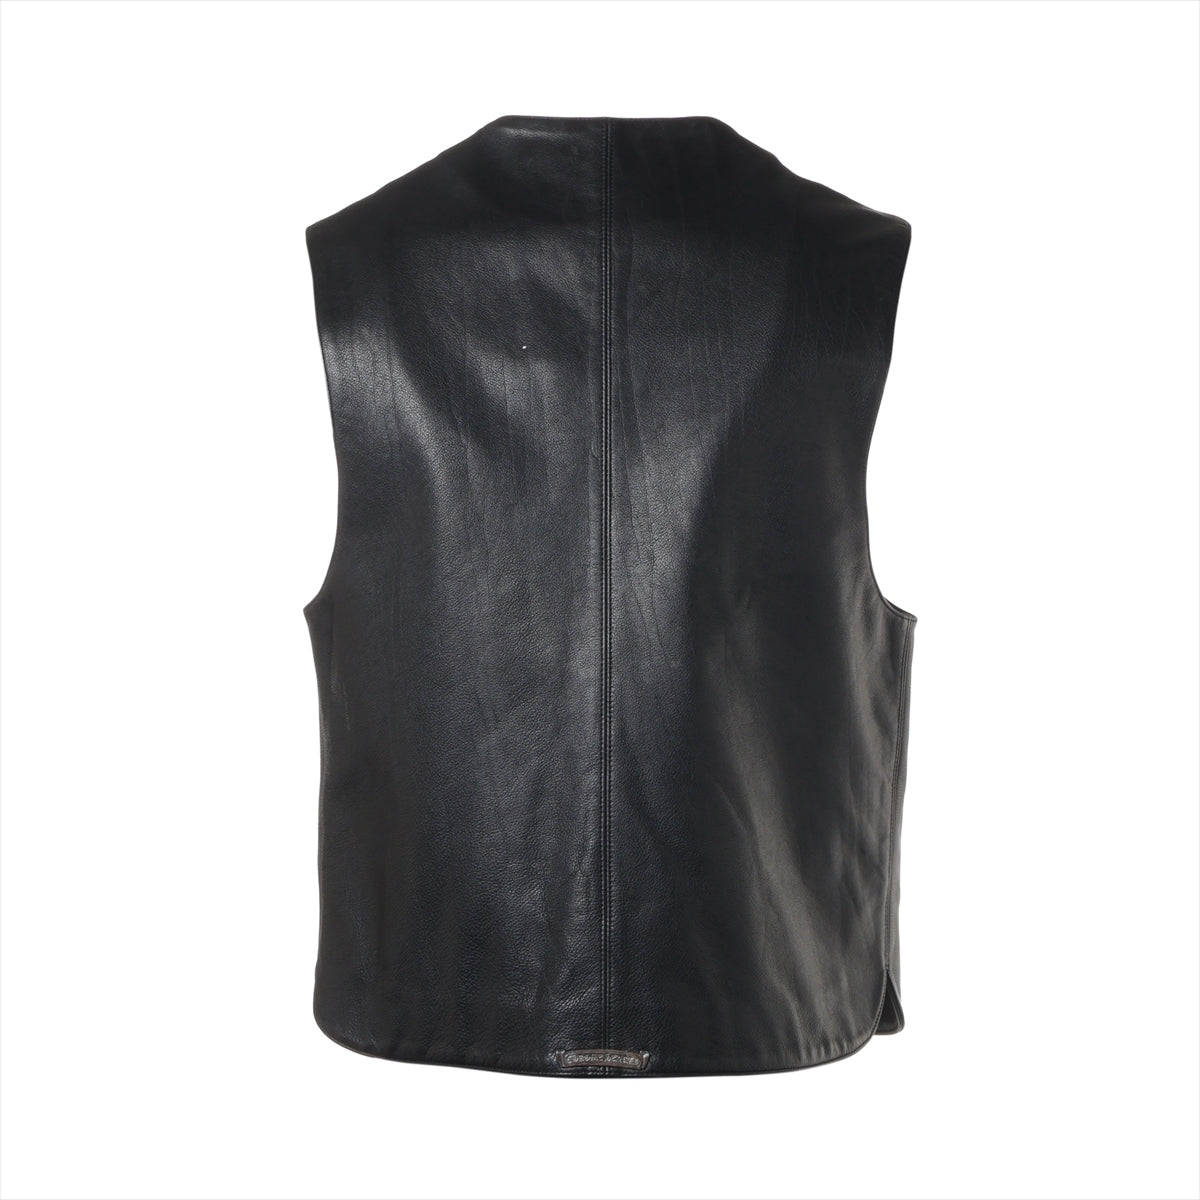 Chrome Hearts Vest Unknown material size M Black Leather BS flare button